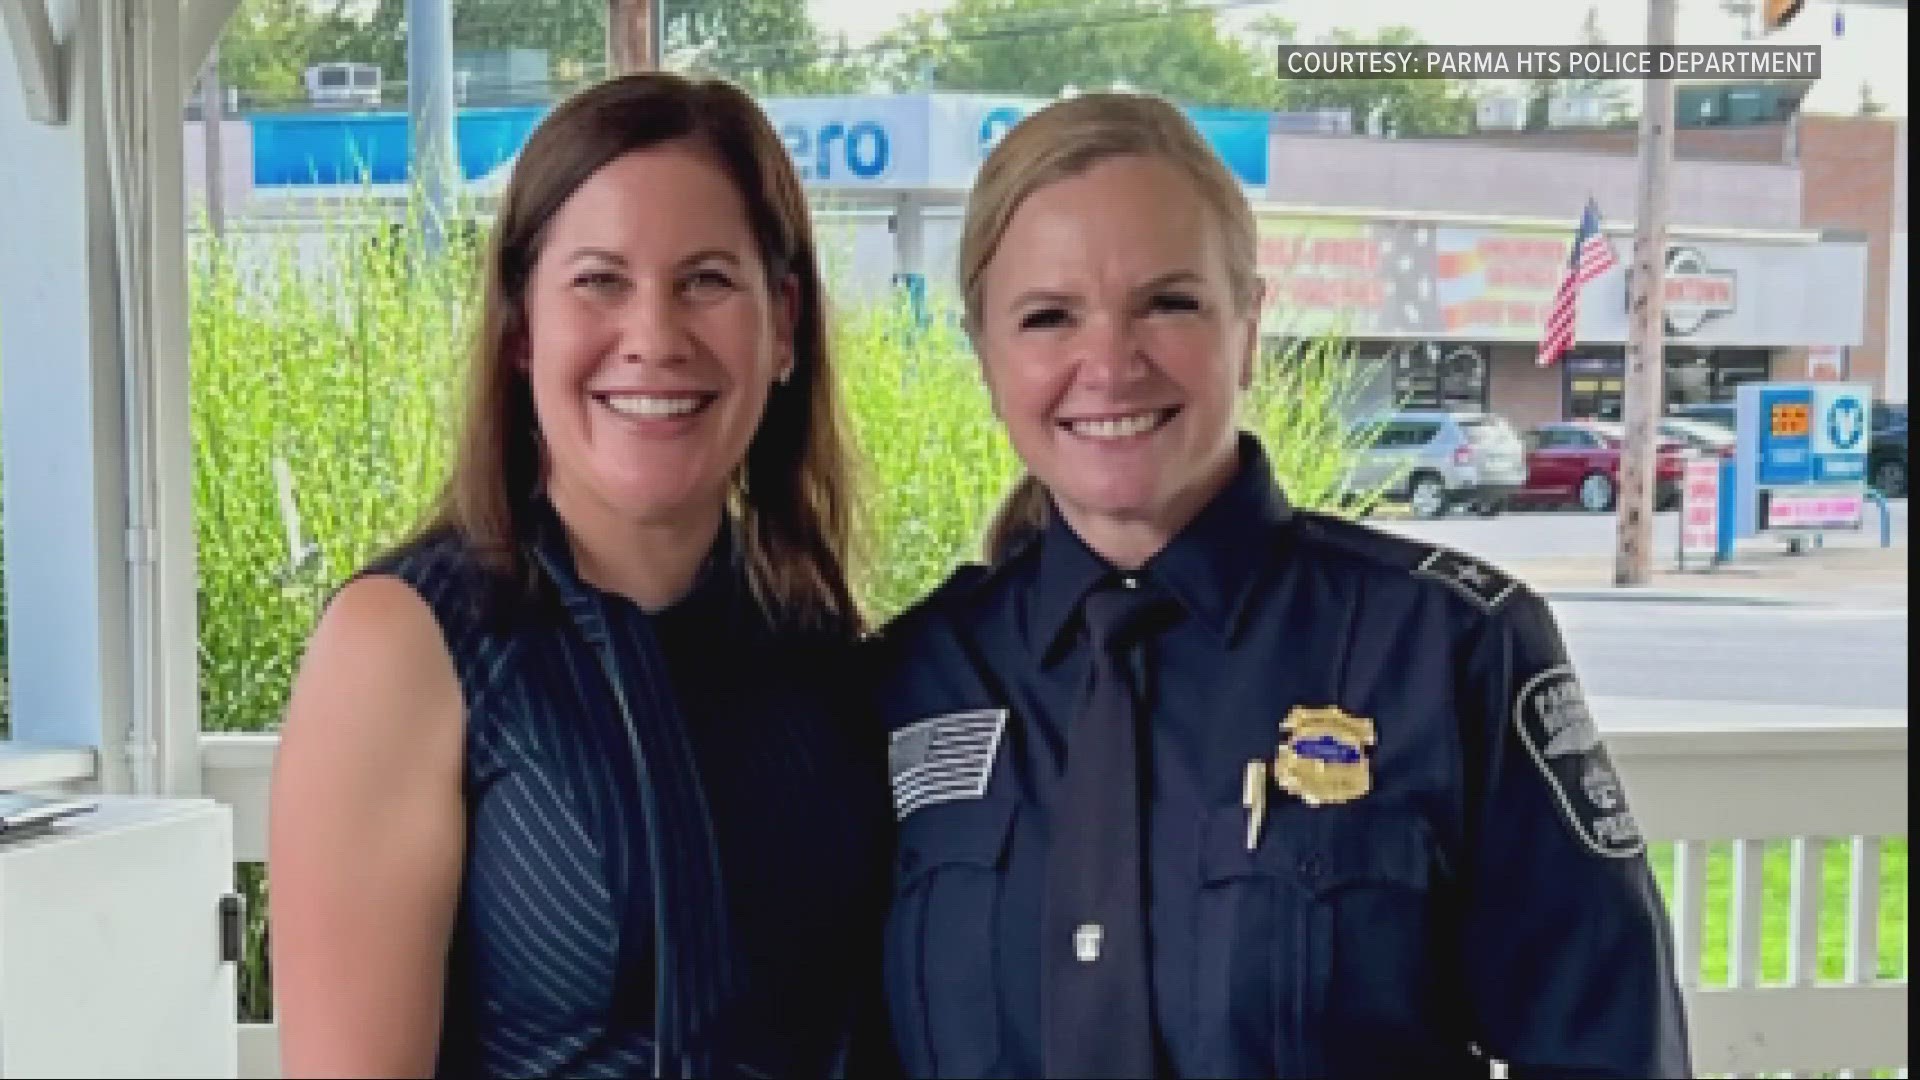 Tanya Czack, a 34-year veteran of the Parma Heights Police Department, is the first female chief of police in the city's history.